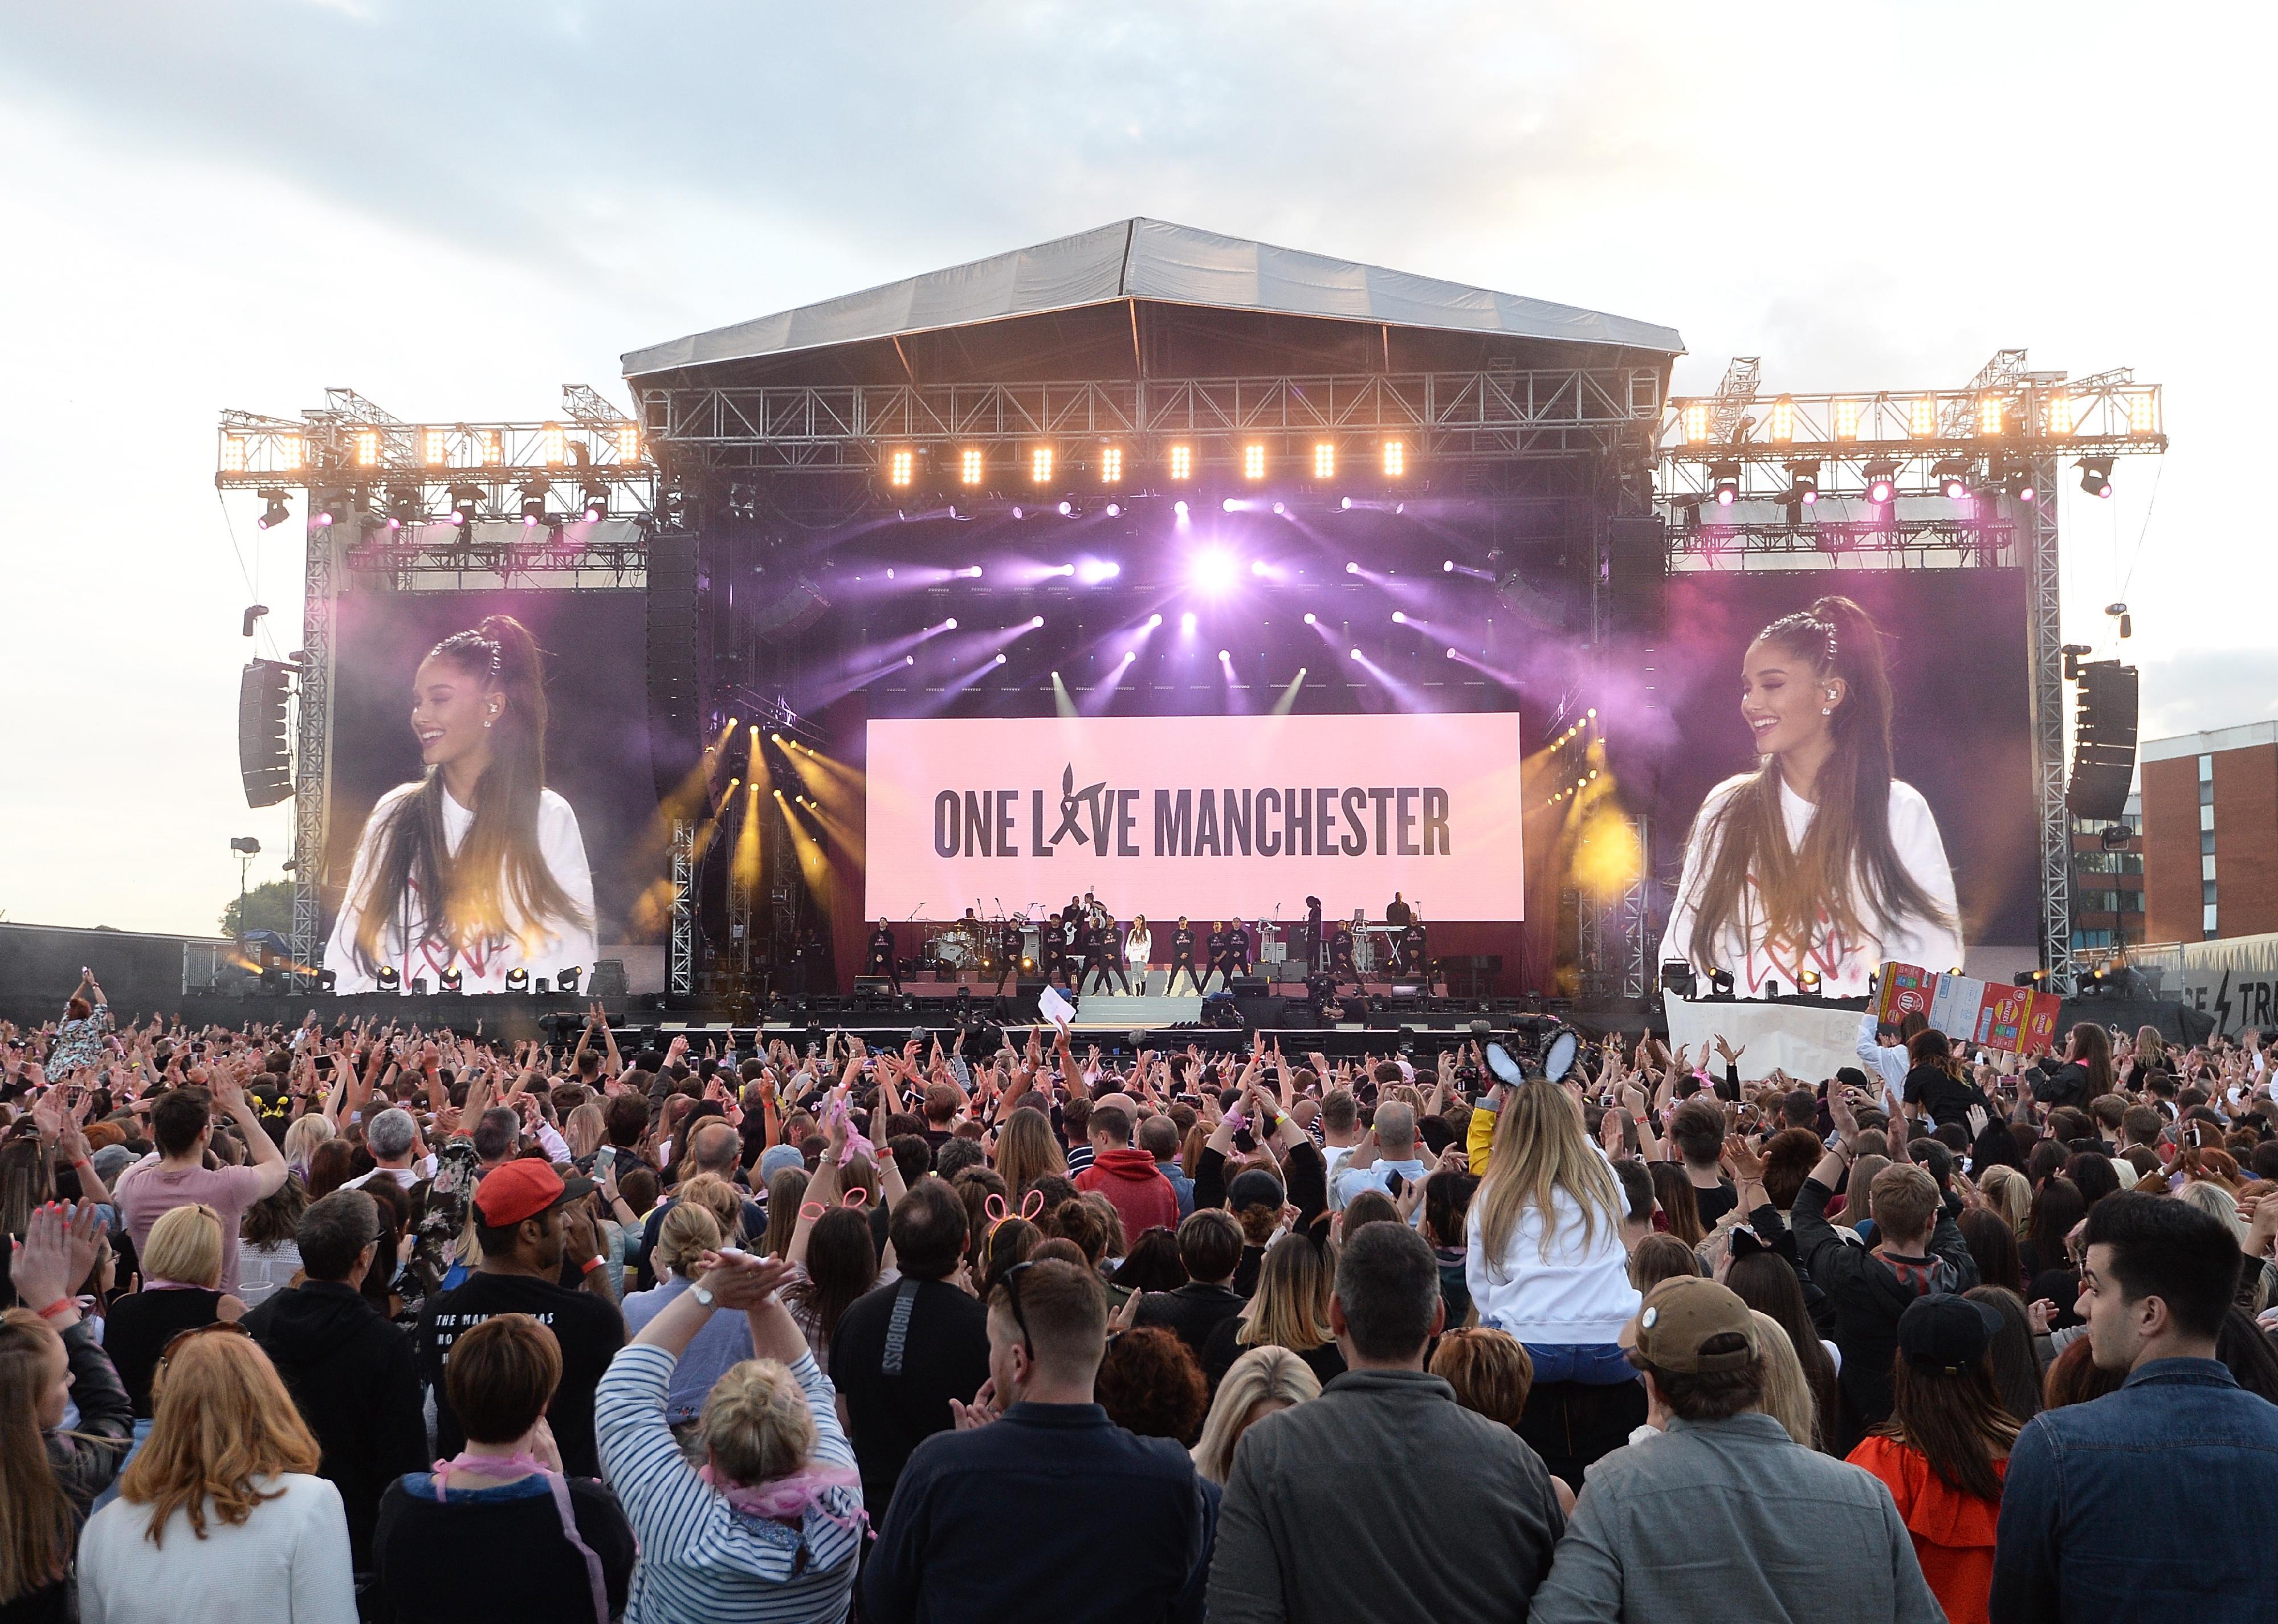 <p>Pop star Ariana Grande co-organized this benefit concert shortly after a terrorist bombing at her show in Manchester Arena. Simultaneously broadcast and streamed, it <a href="https://www.digitalspy.com/music/a835681/ariana-grande-one-love-manchester-raises-18-million/">raised £18 million for victims' families</a>. Performers included Grande herself along with Katy Perry, Justin Bieber, Mac Miller, Coldplay, and others.</p>